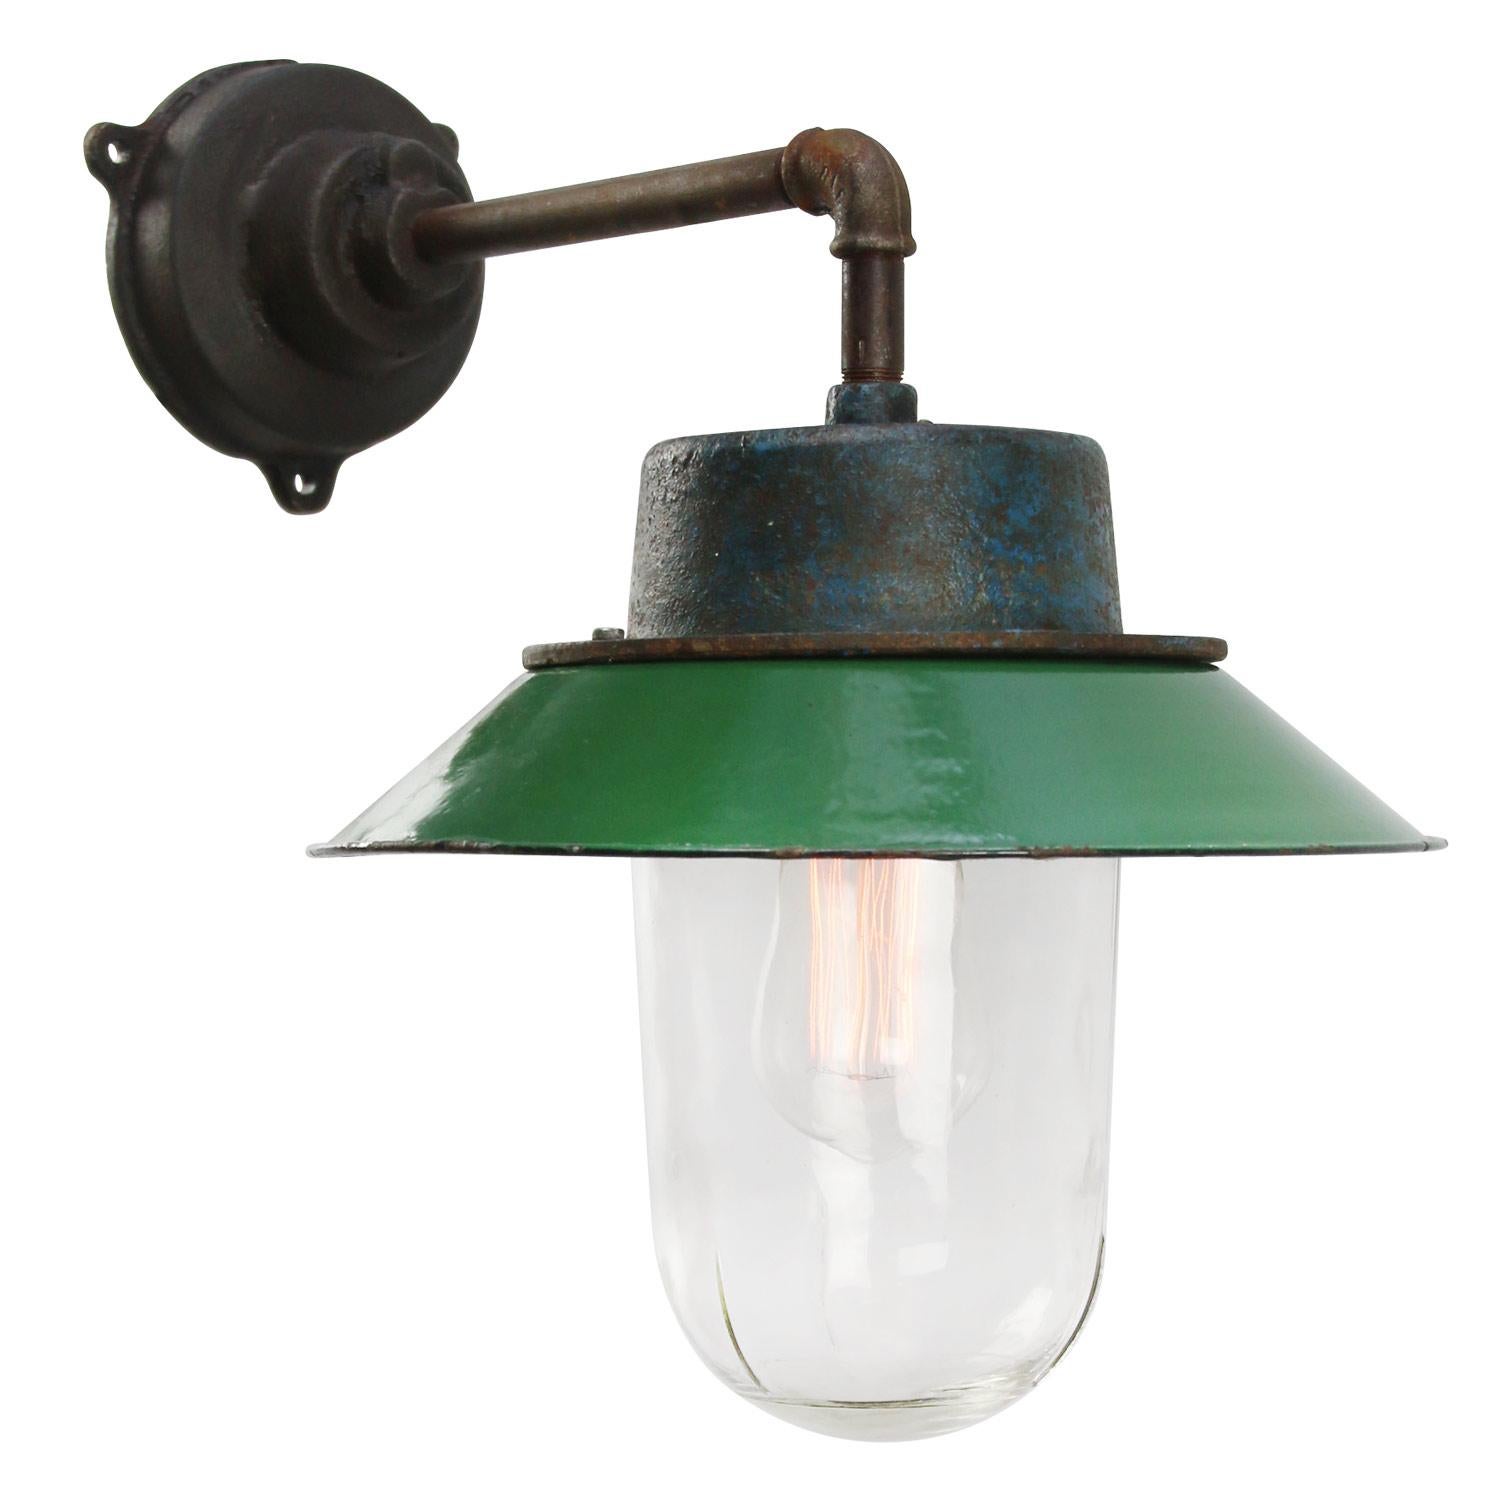 Green enamel industrial wall light.
Cast iron top.
Clear glass.

Diameter cast iron wall piece: 12 cm. Three holes to secure.

Weight: 6.5 kg / 14.3 lb

Priced per individual item. All lamps have been made suitable by international standards